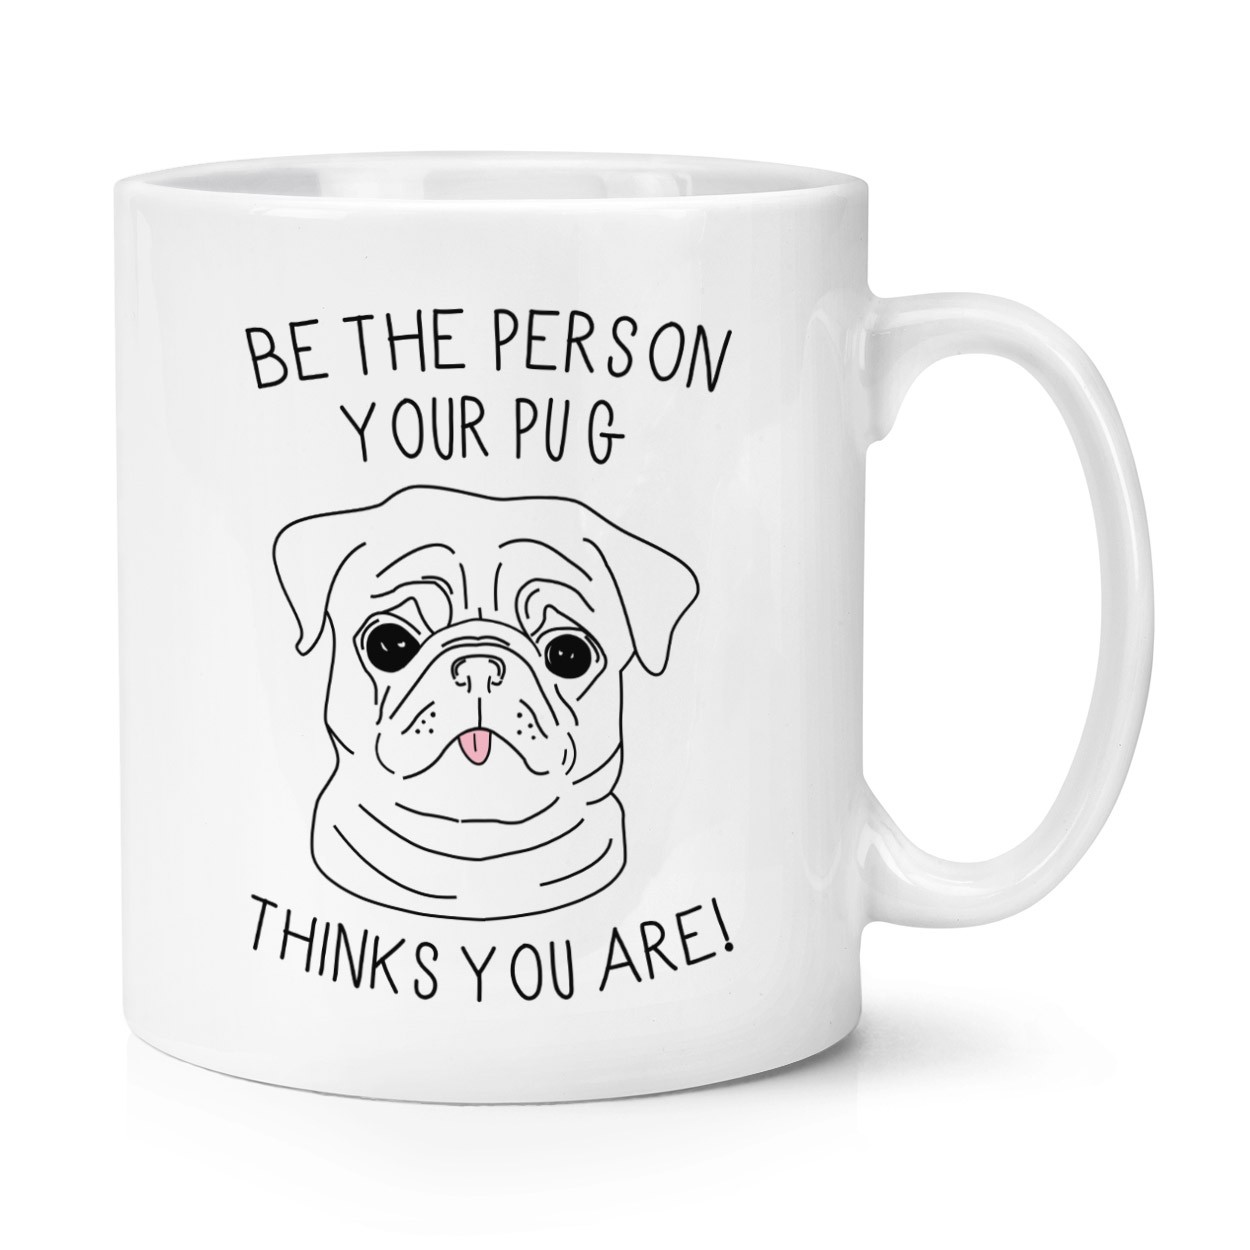 Be The Person Your Pug Thinks You Are 10oz Mug Cup